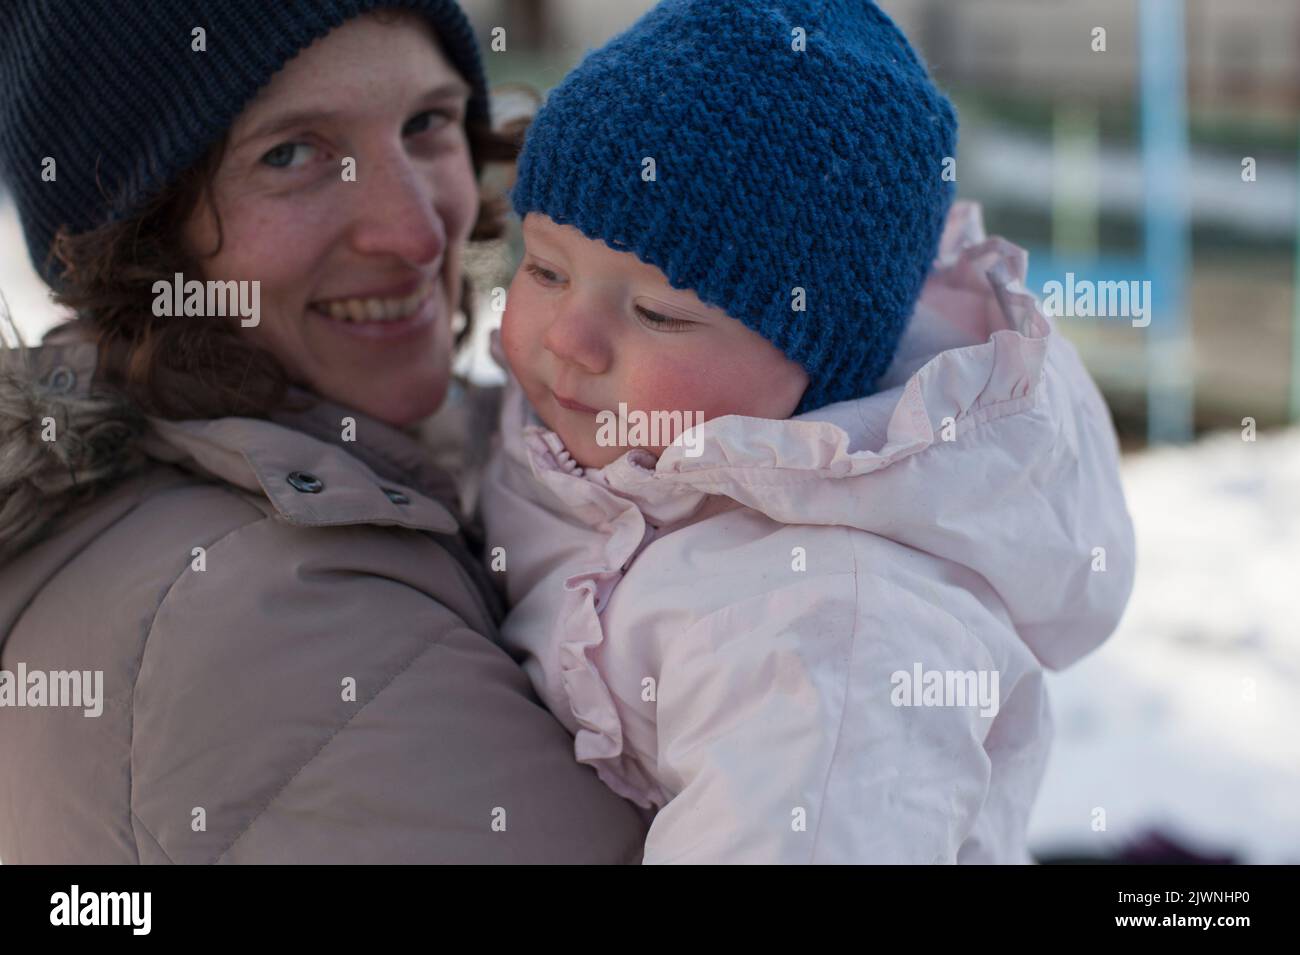 A smiling mother in winter gear holds a baby in a pink snowsuit and blue knitted touque hat against a wintry urban background. Stock Photo